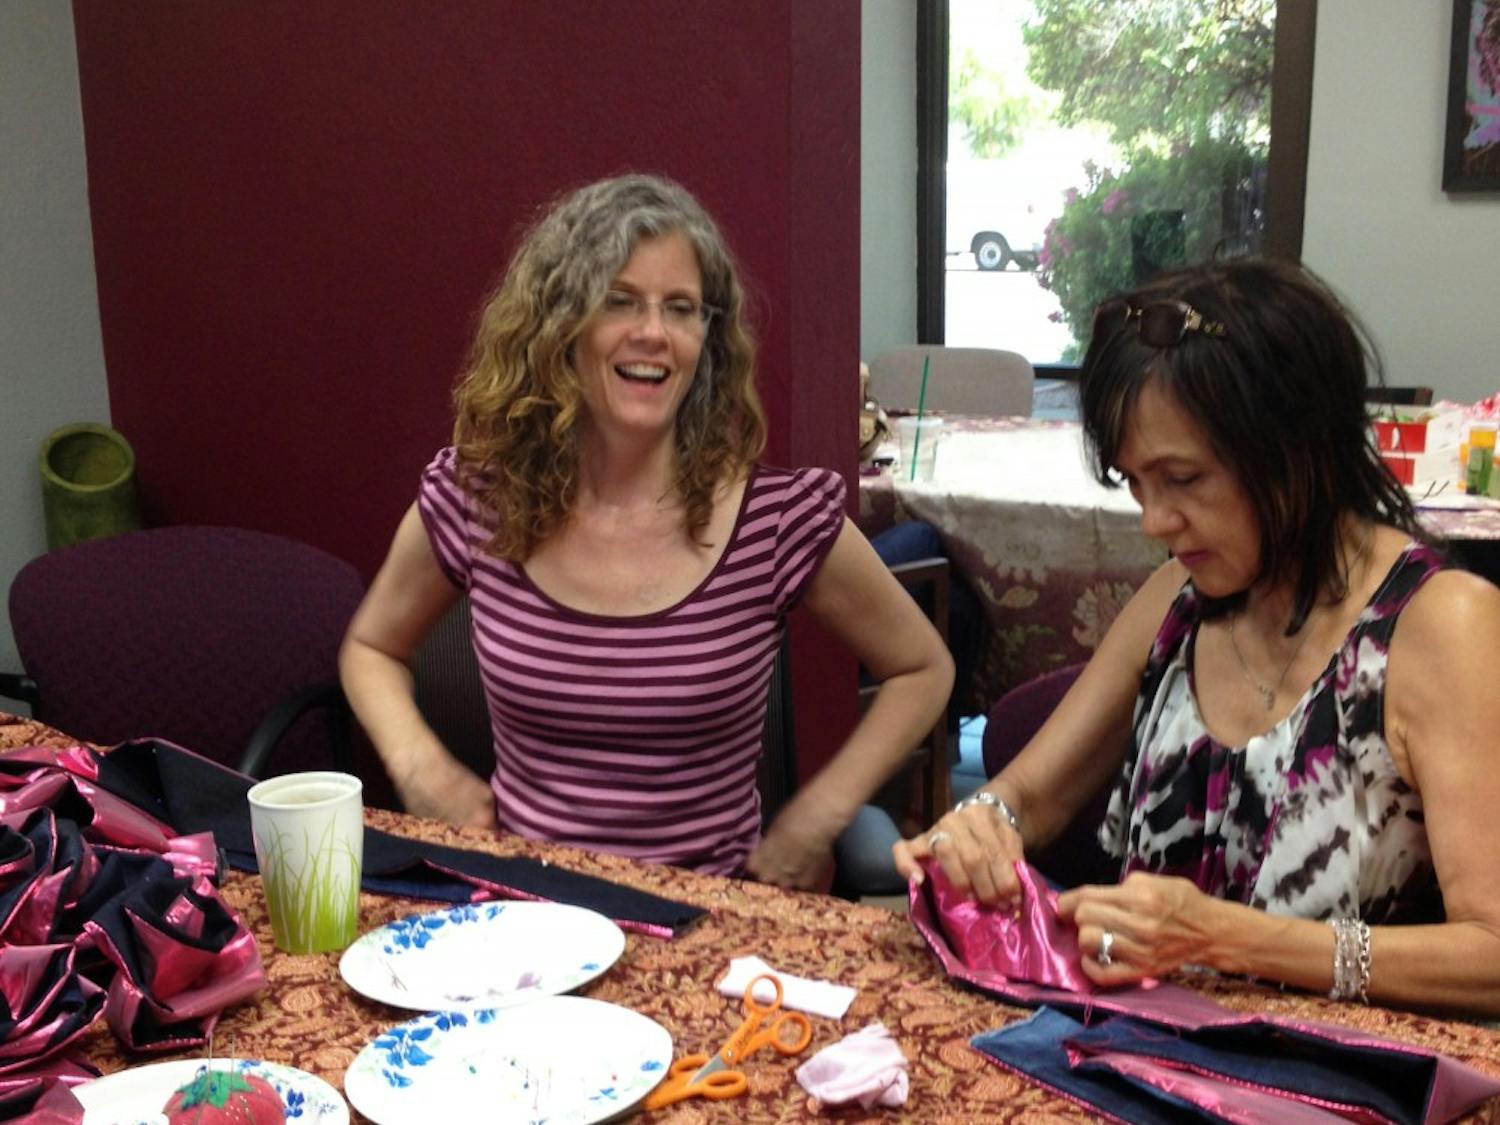 Crystal Daigle teaches Sharra, a community volunteer, how to make a Resiliency Rose. (Photo courtesy of Crystal Daigle)